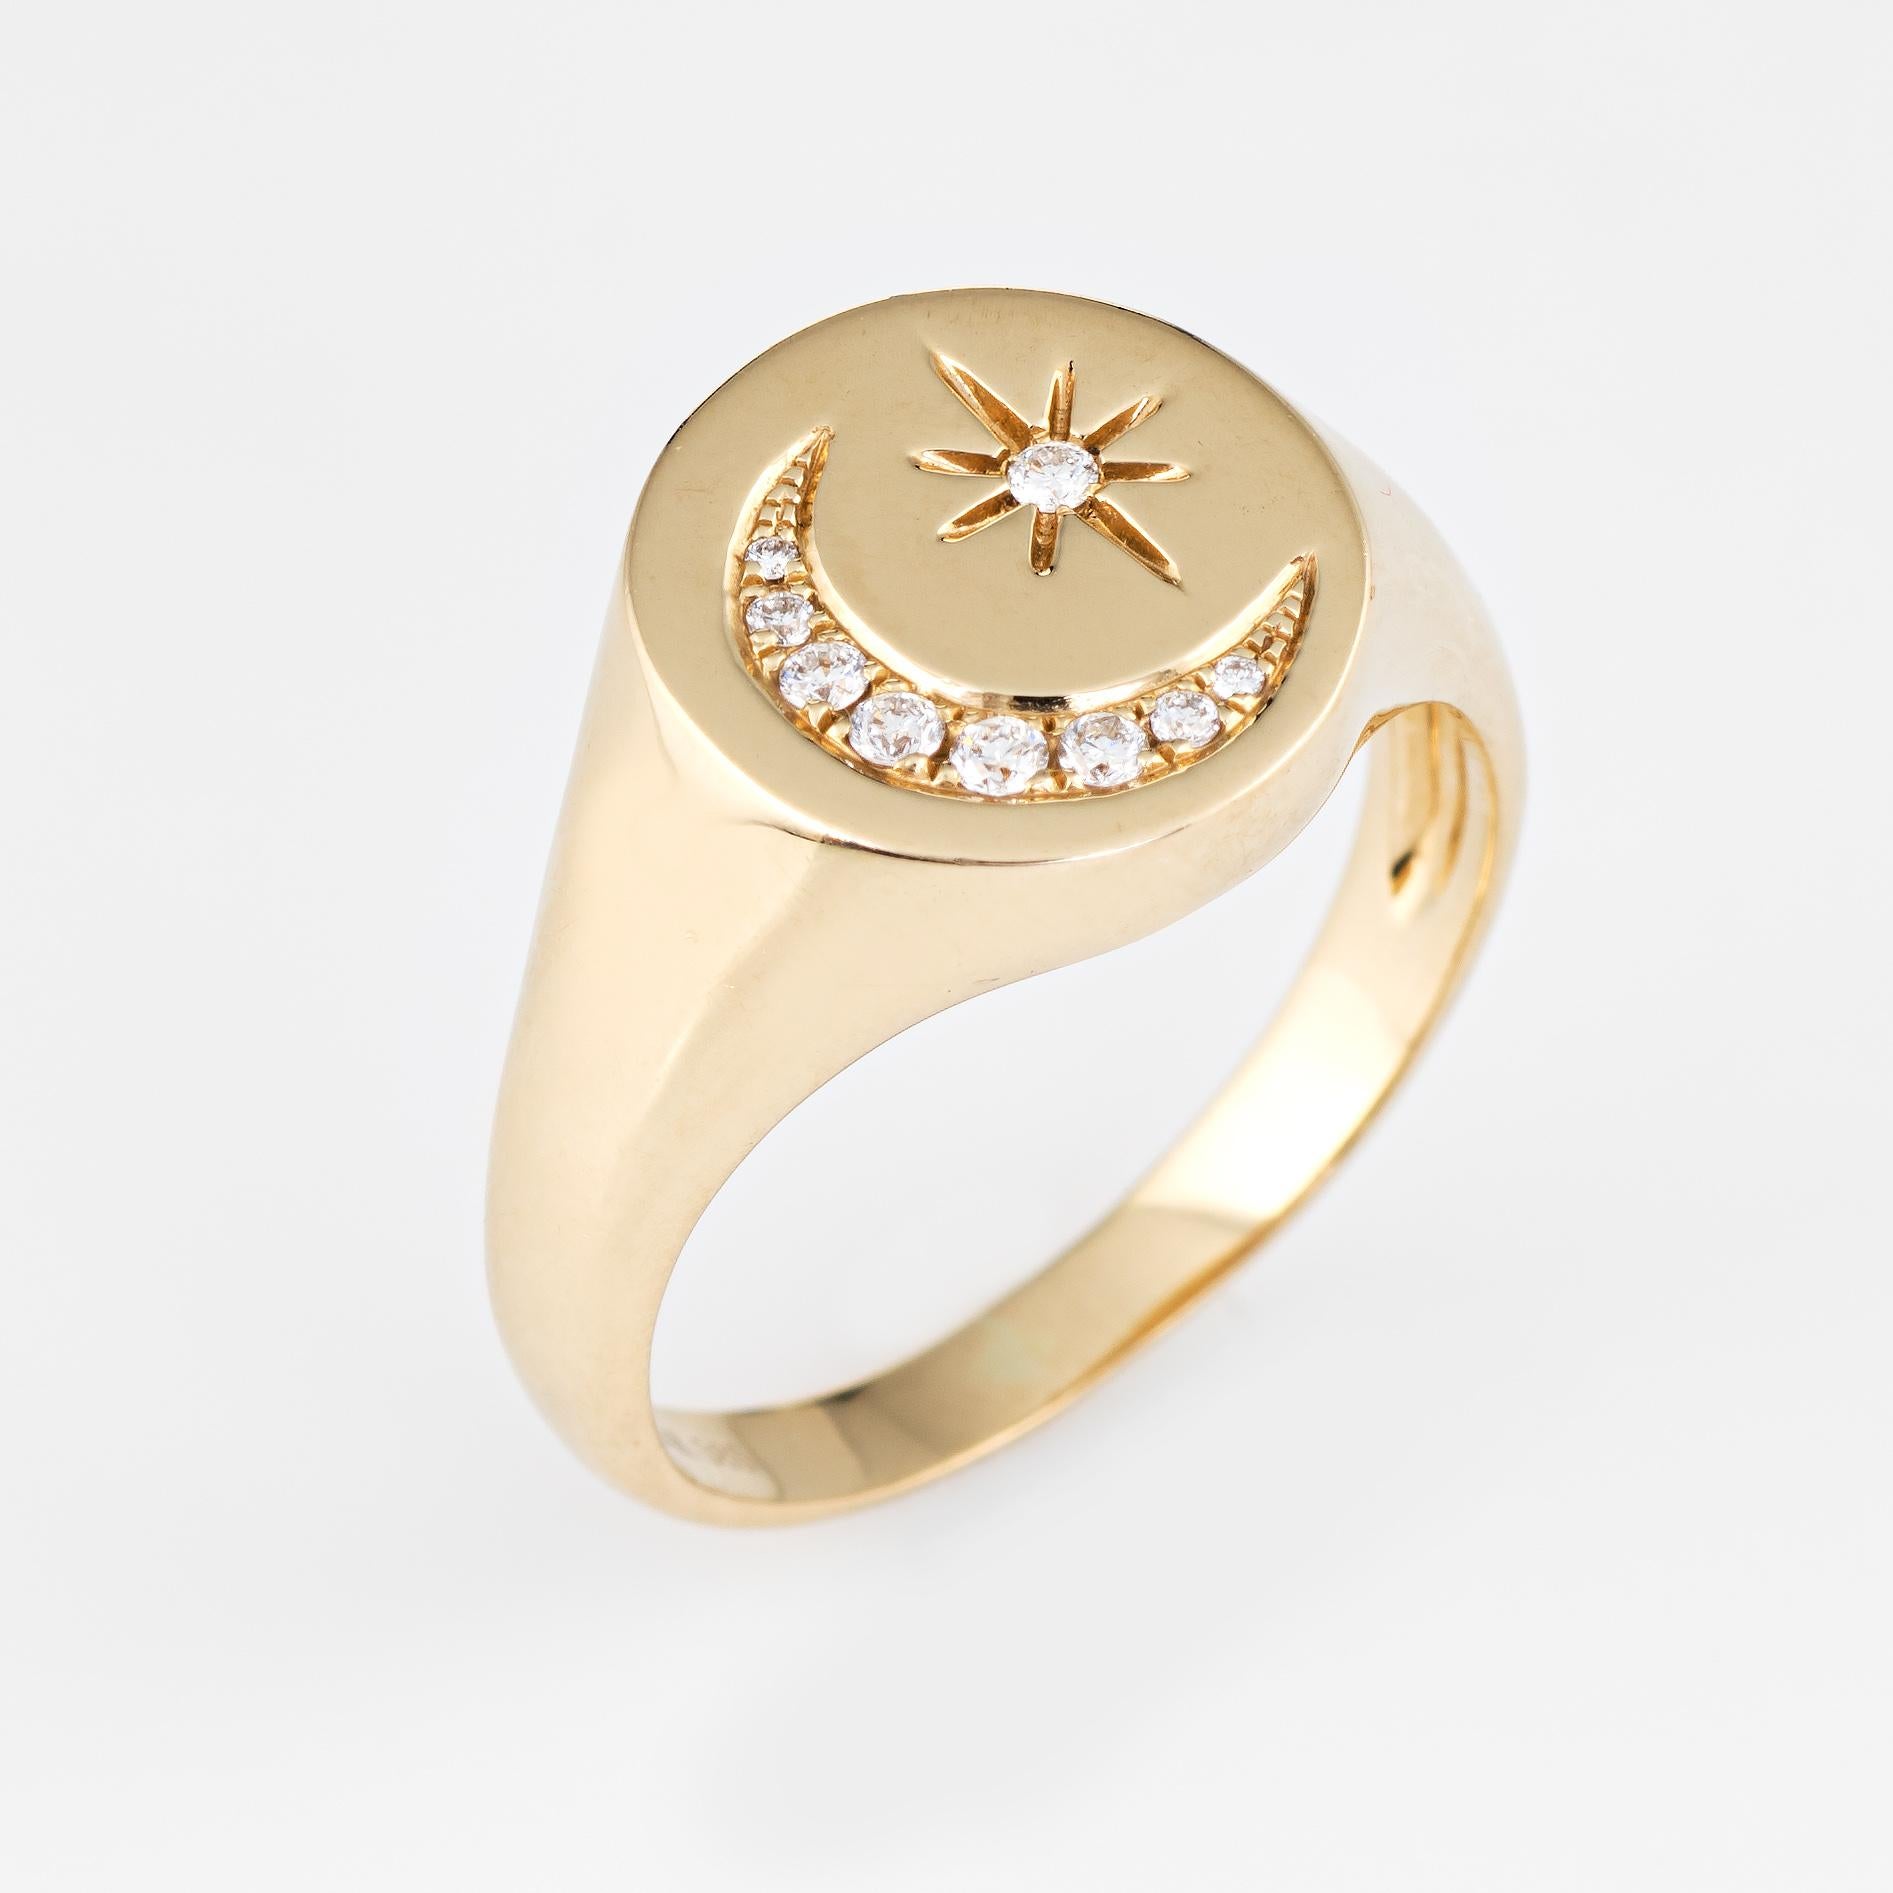 Elegant estate crescent moon & star diamond signet ring crafted in 14 karat yellow gold. 

Diamonds total an estimated 0.08 carats (estimated at H-I color and VS2-SI1 clarity). 

The signet ring features a crescent moon and star motif. The low